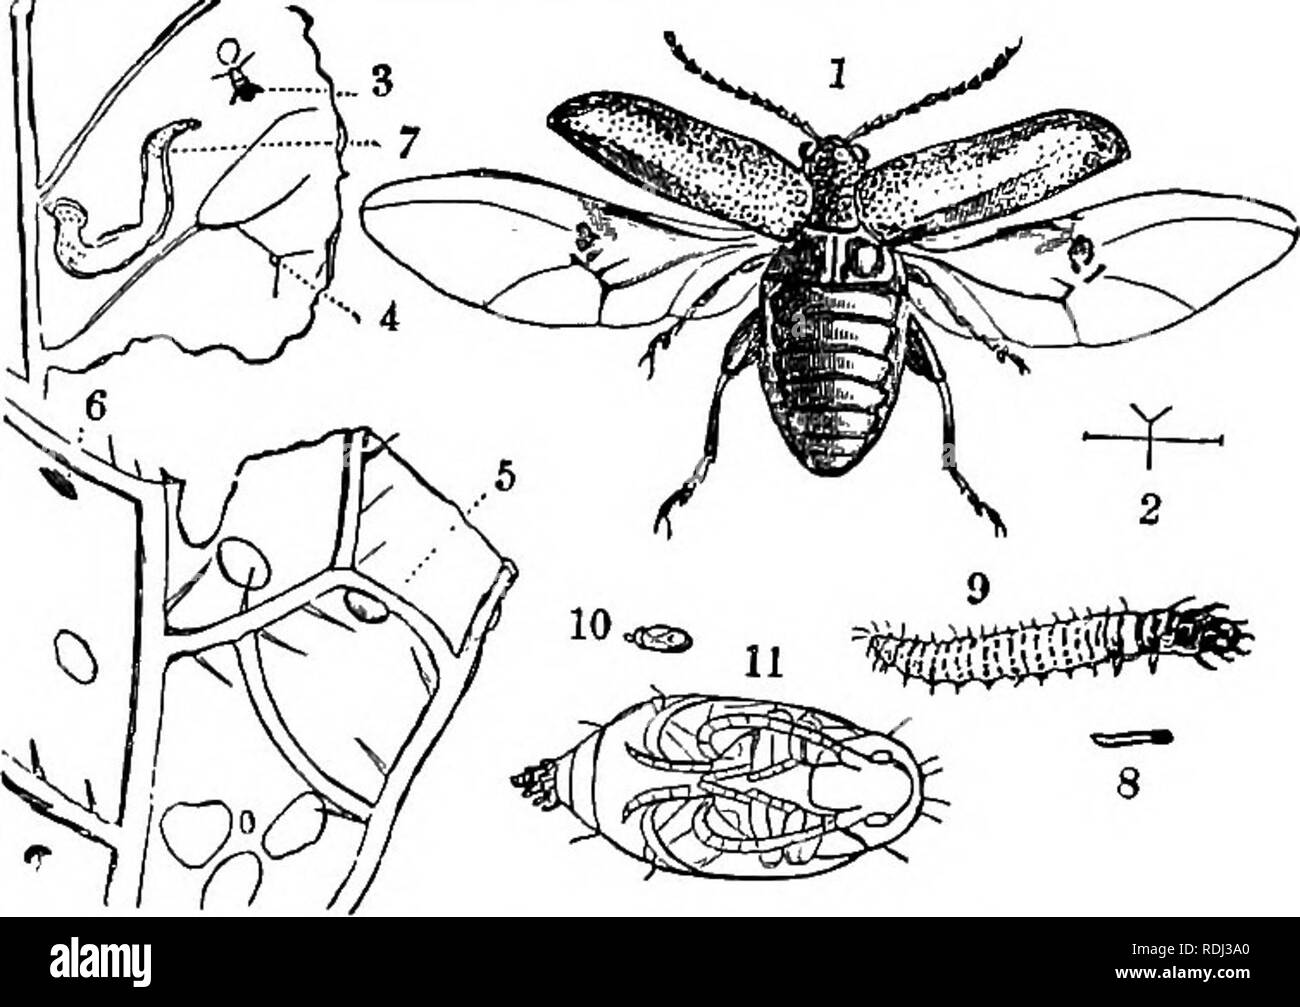 A Manual Of Elementary Zoology Zoology Insects 285 Insects The Change By Which A Larva Becomes An Adult Is Known As Its Metamorphosis The Adult Form Of An Insect Is